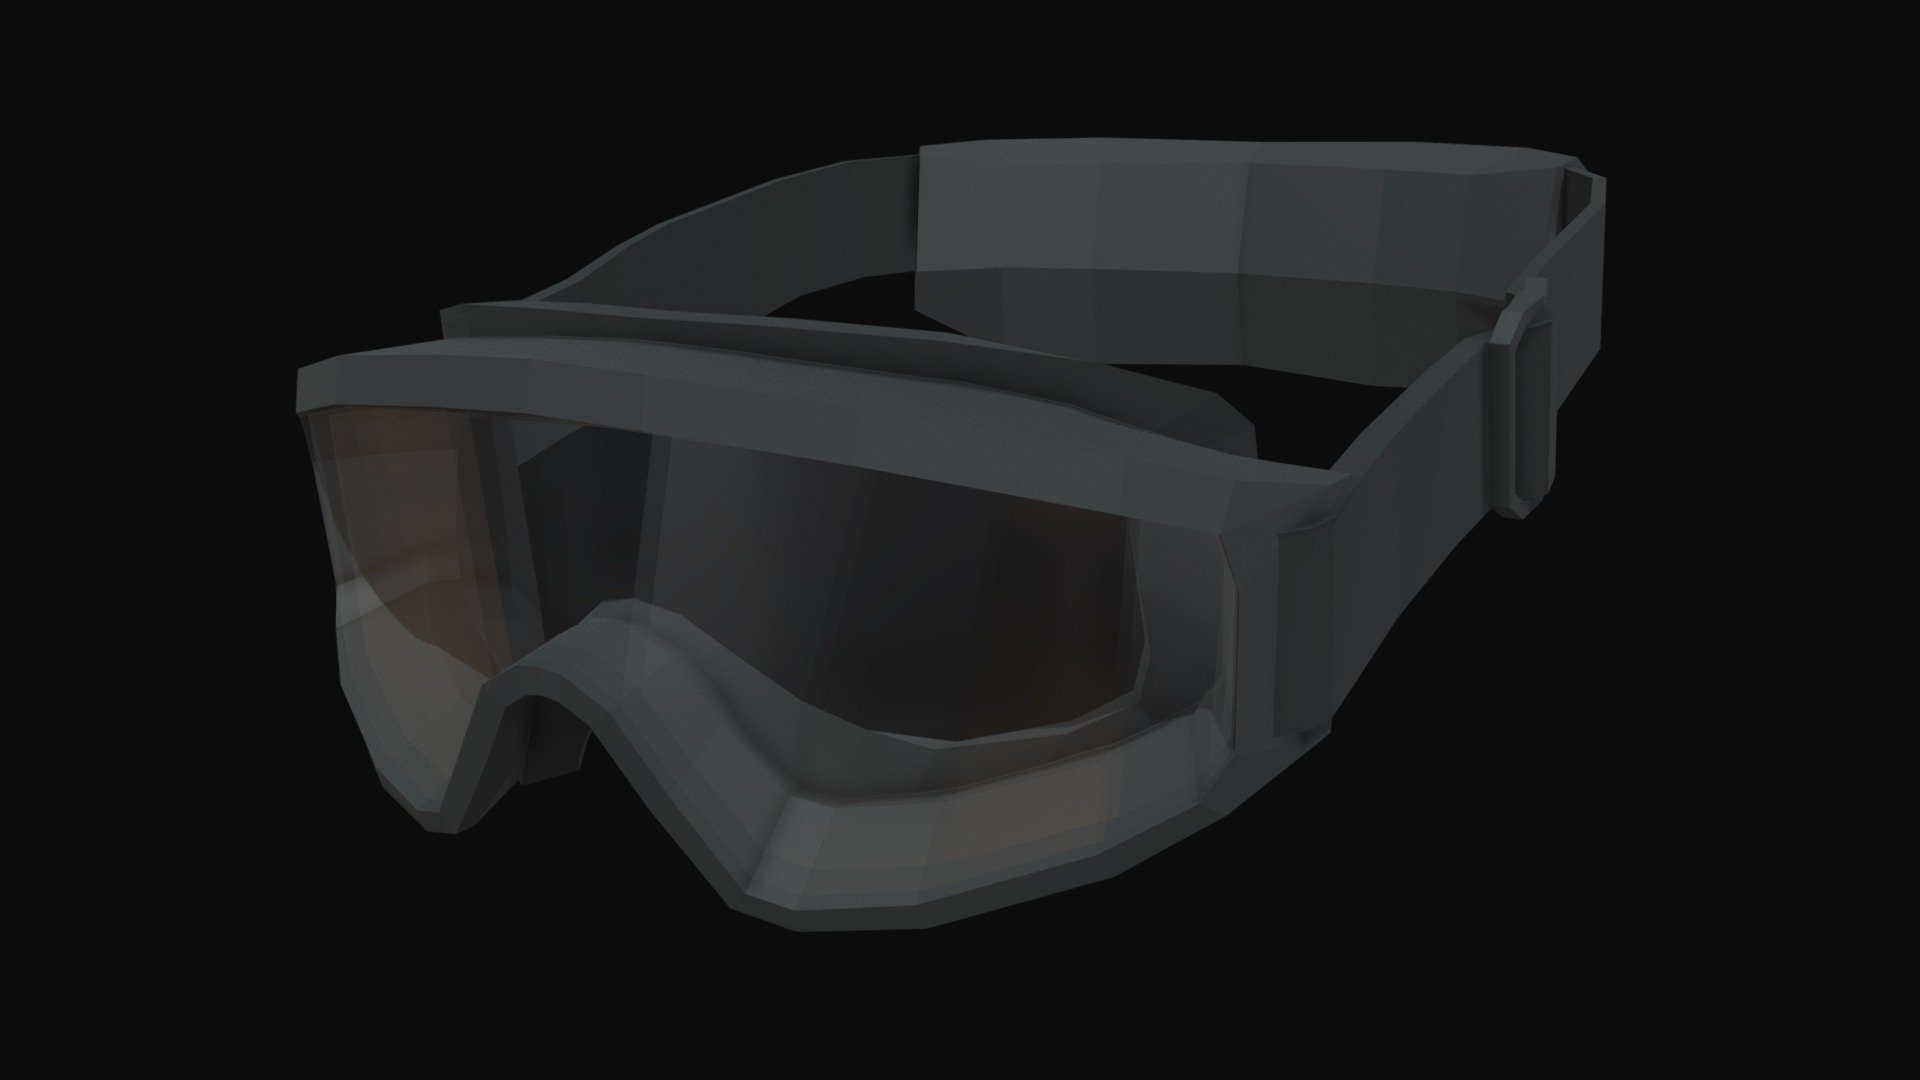 A low poly model of Goggles

Ideal for for use in games

Tested in unity. Simply drag and drop into unity to use

Made in blender - Tactical Goggles Low Poly - Buy Royalty Free 3D model by Castletyne 3d model